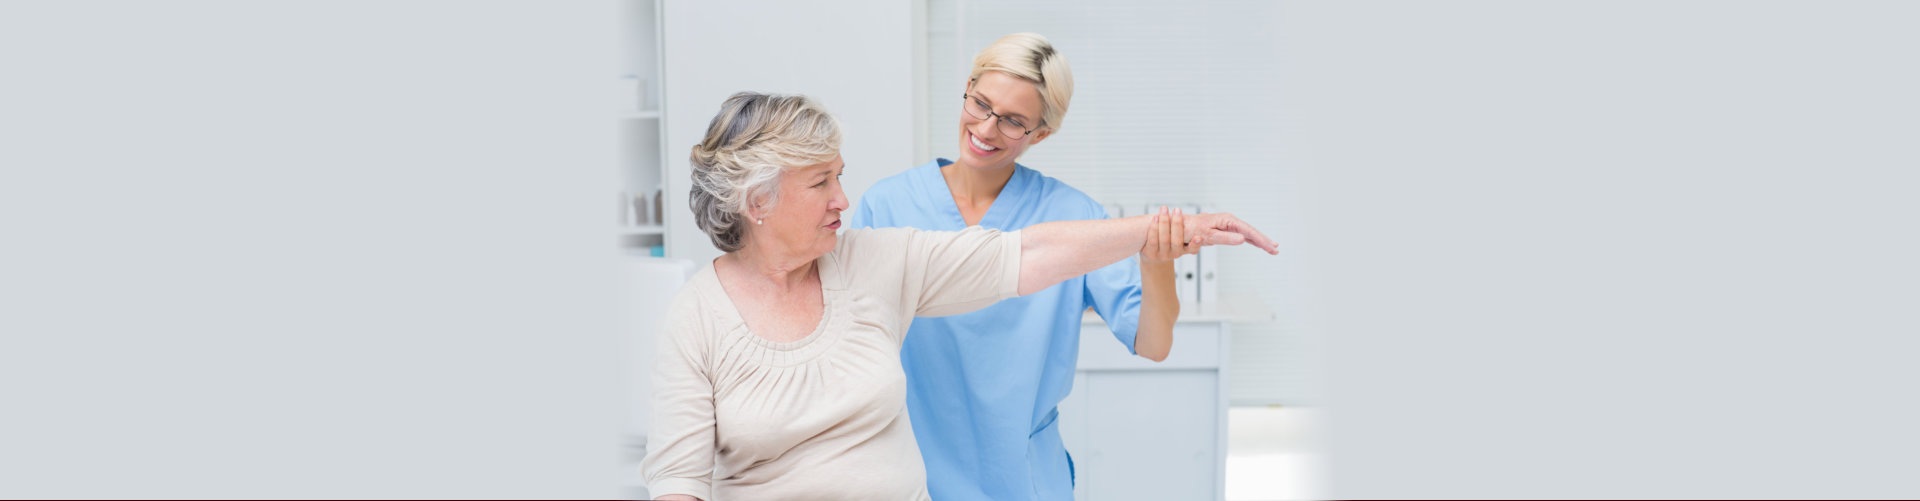 woman stretching with nurse